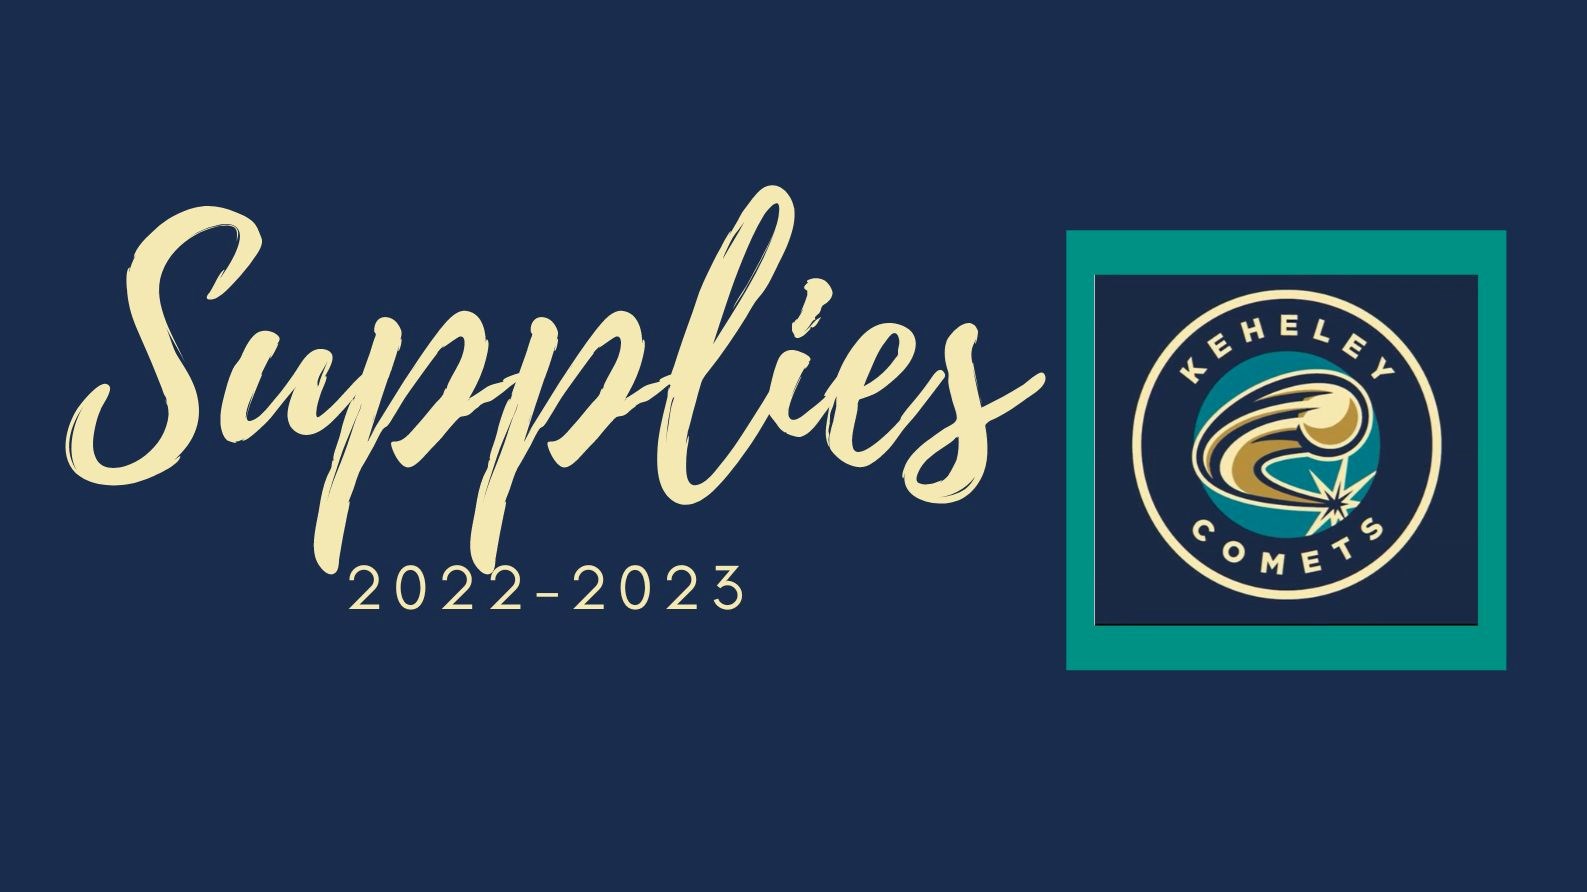 Keheley Comets Supplies 2022-2023